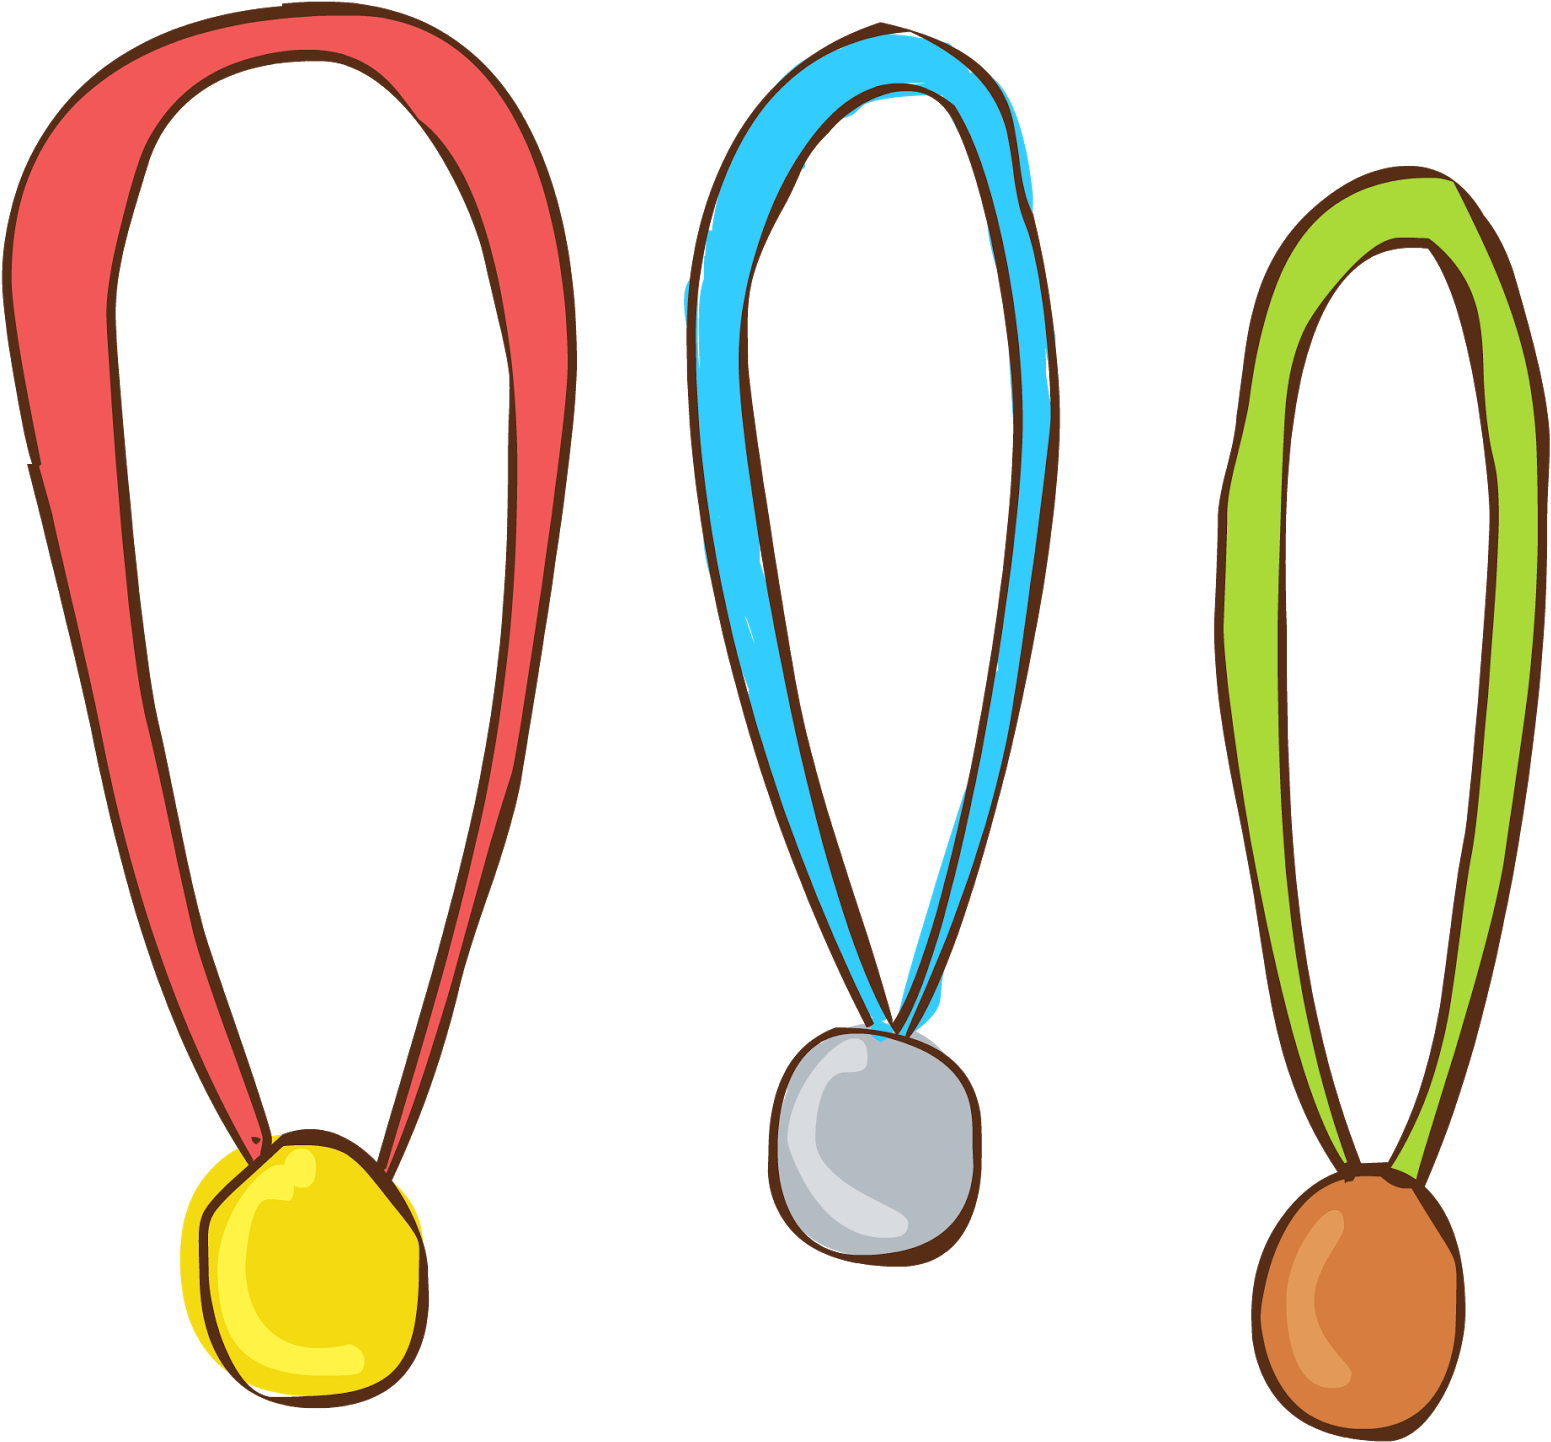 A Group Of Medals With Ribbons